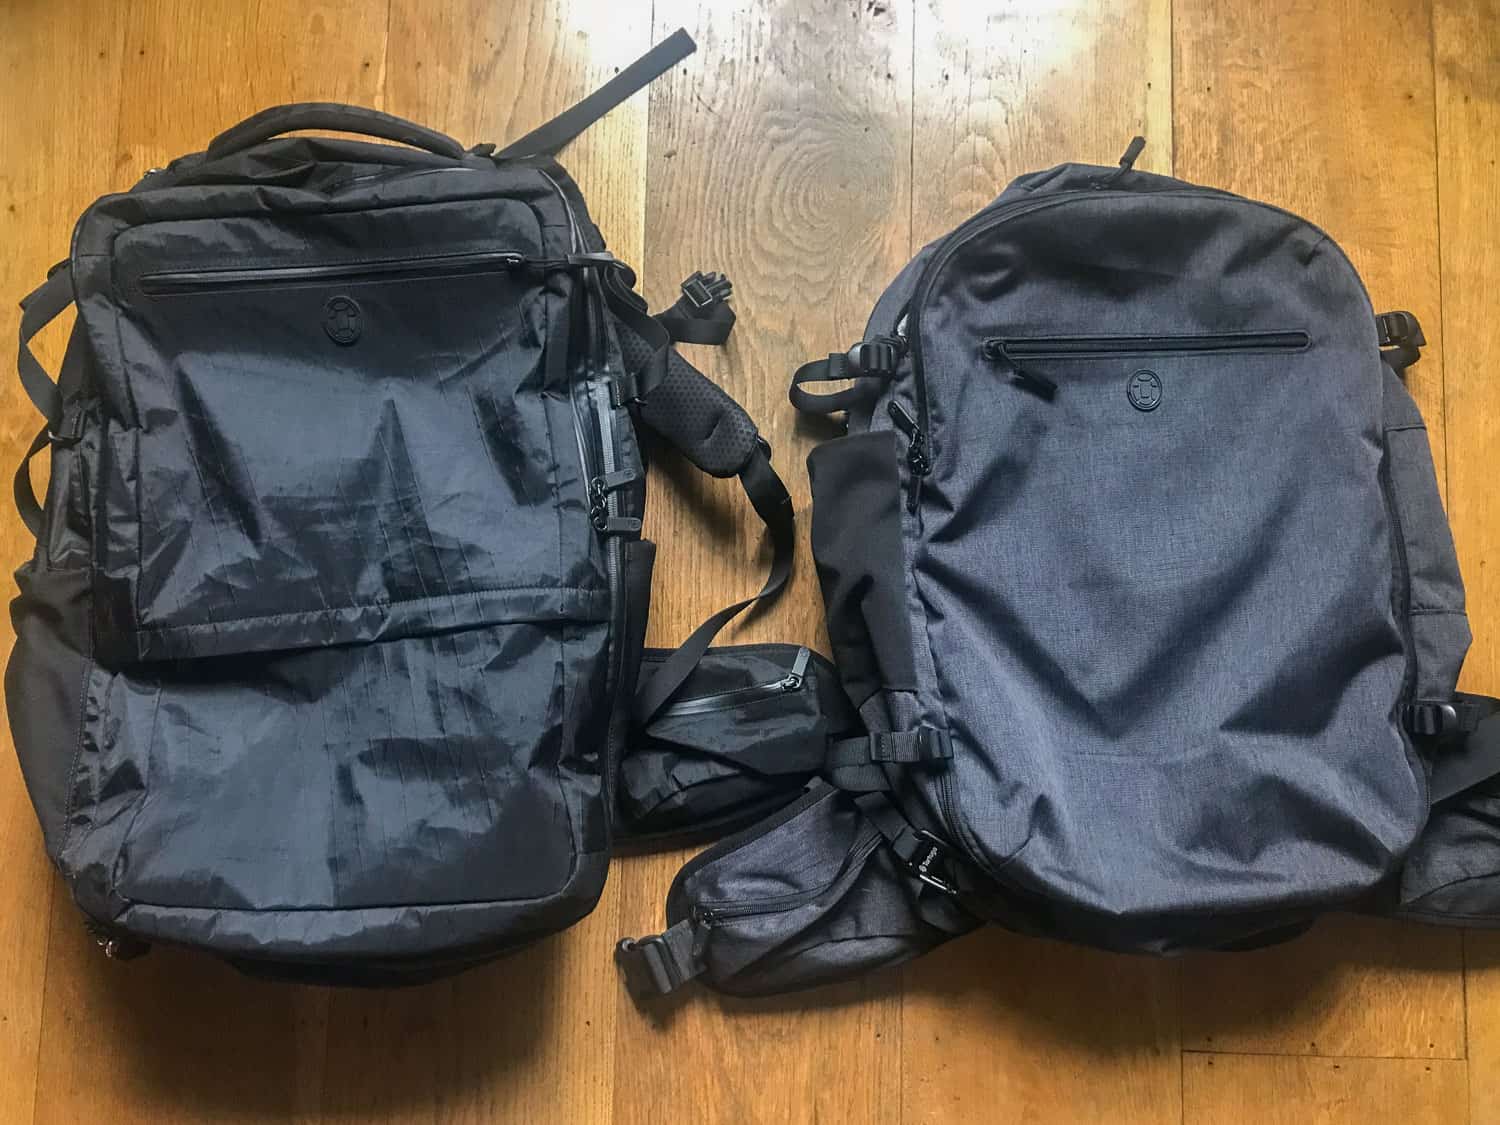 The front of the Outbreaker and Setout backpacks compared